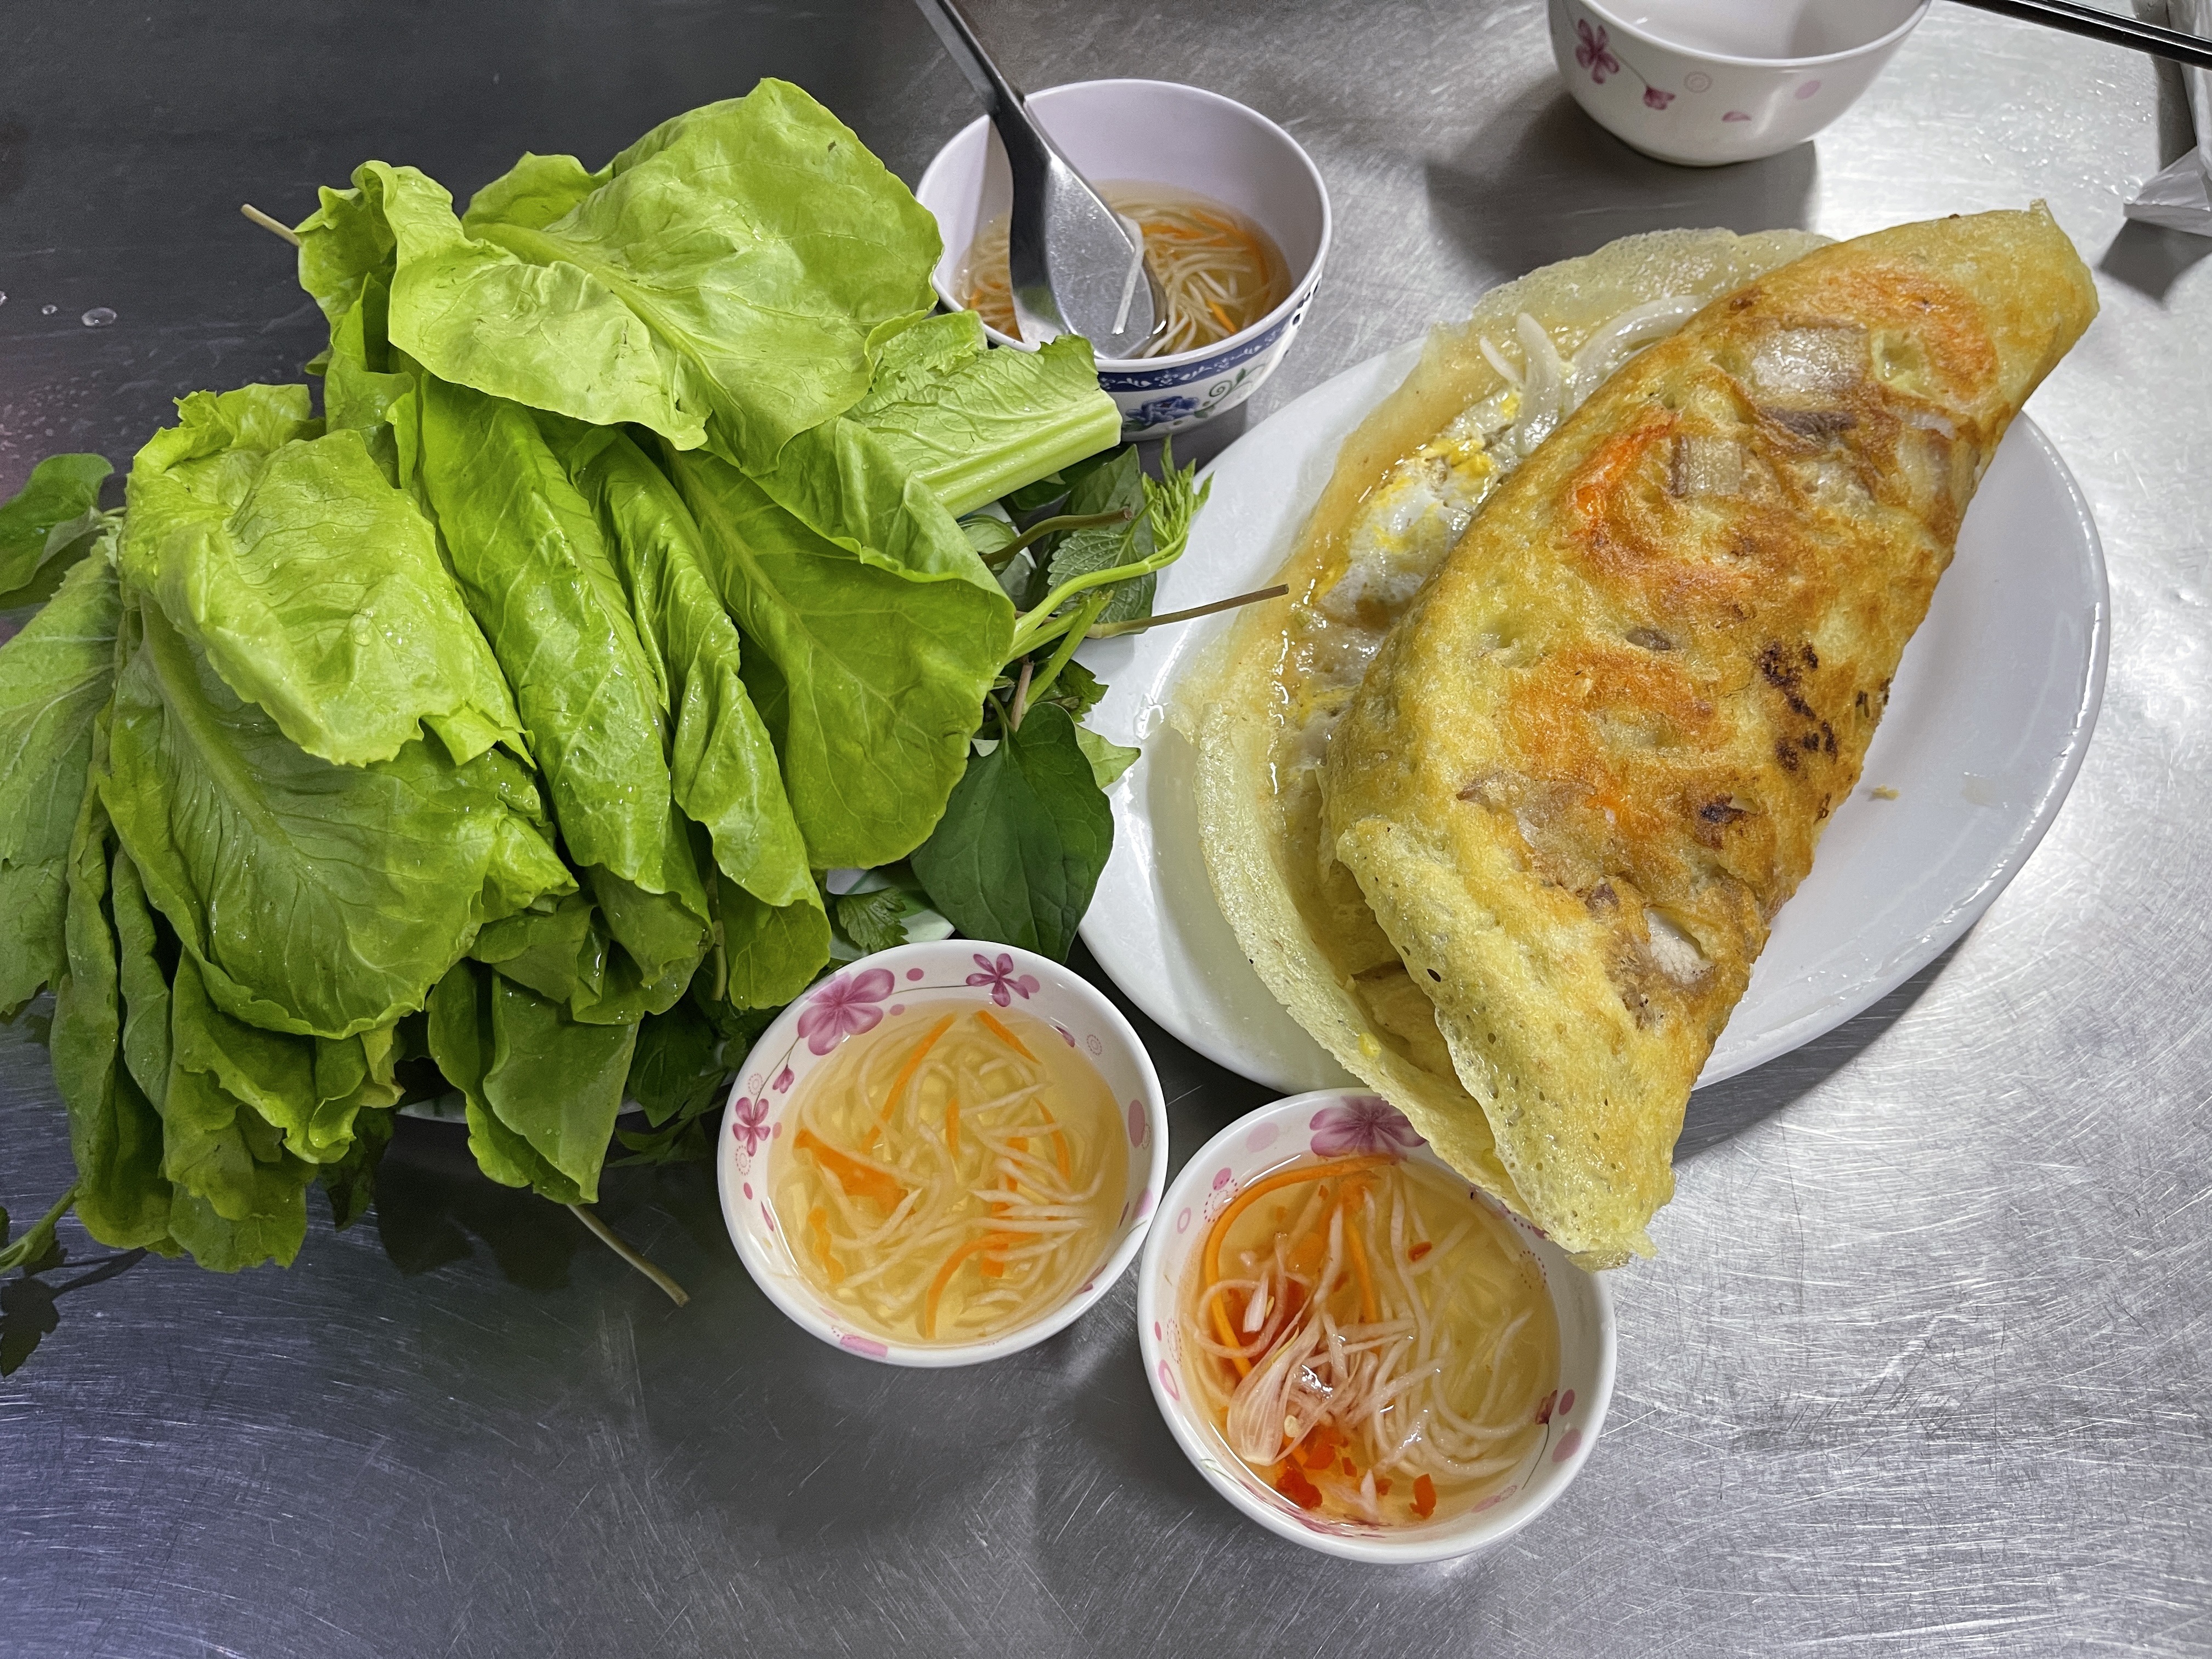 Veggie is served with 'banh xeo' (Vietnamese sizzling savory crepes) at an eatery in District 1, Ho Chi Minh City. Photo: Dong Nguyen / Tuoi Tre News